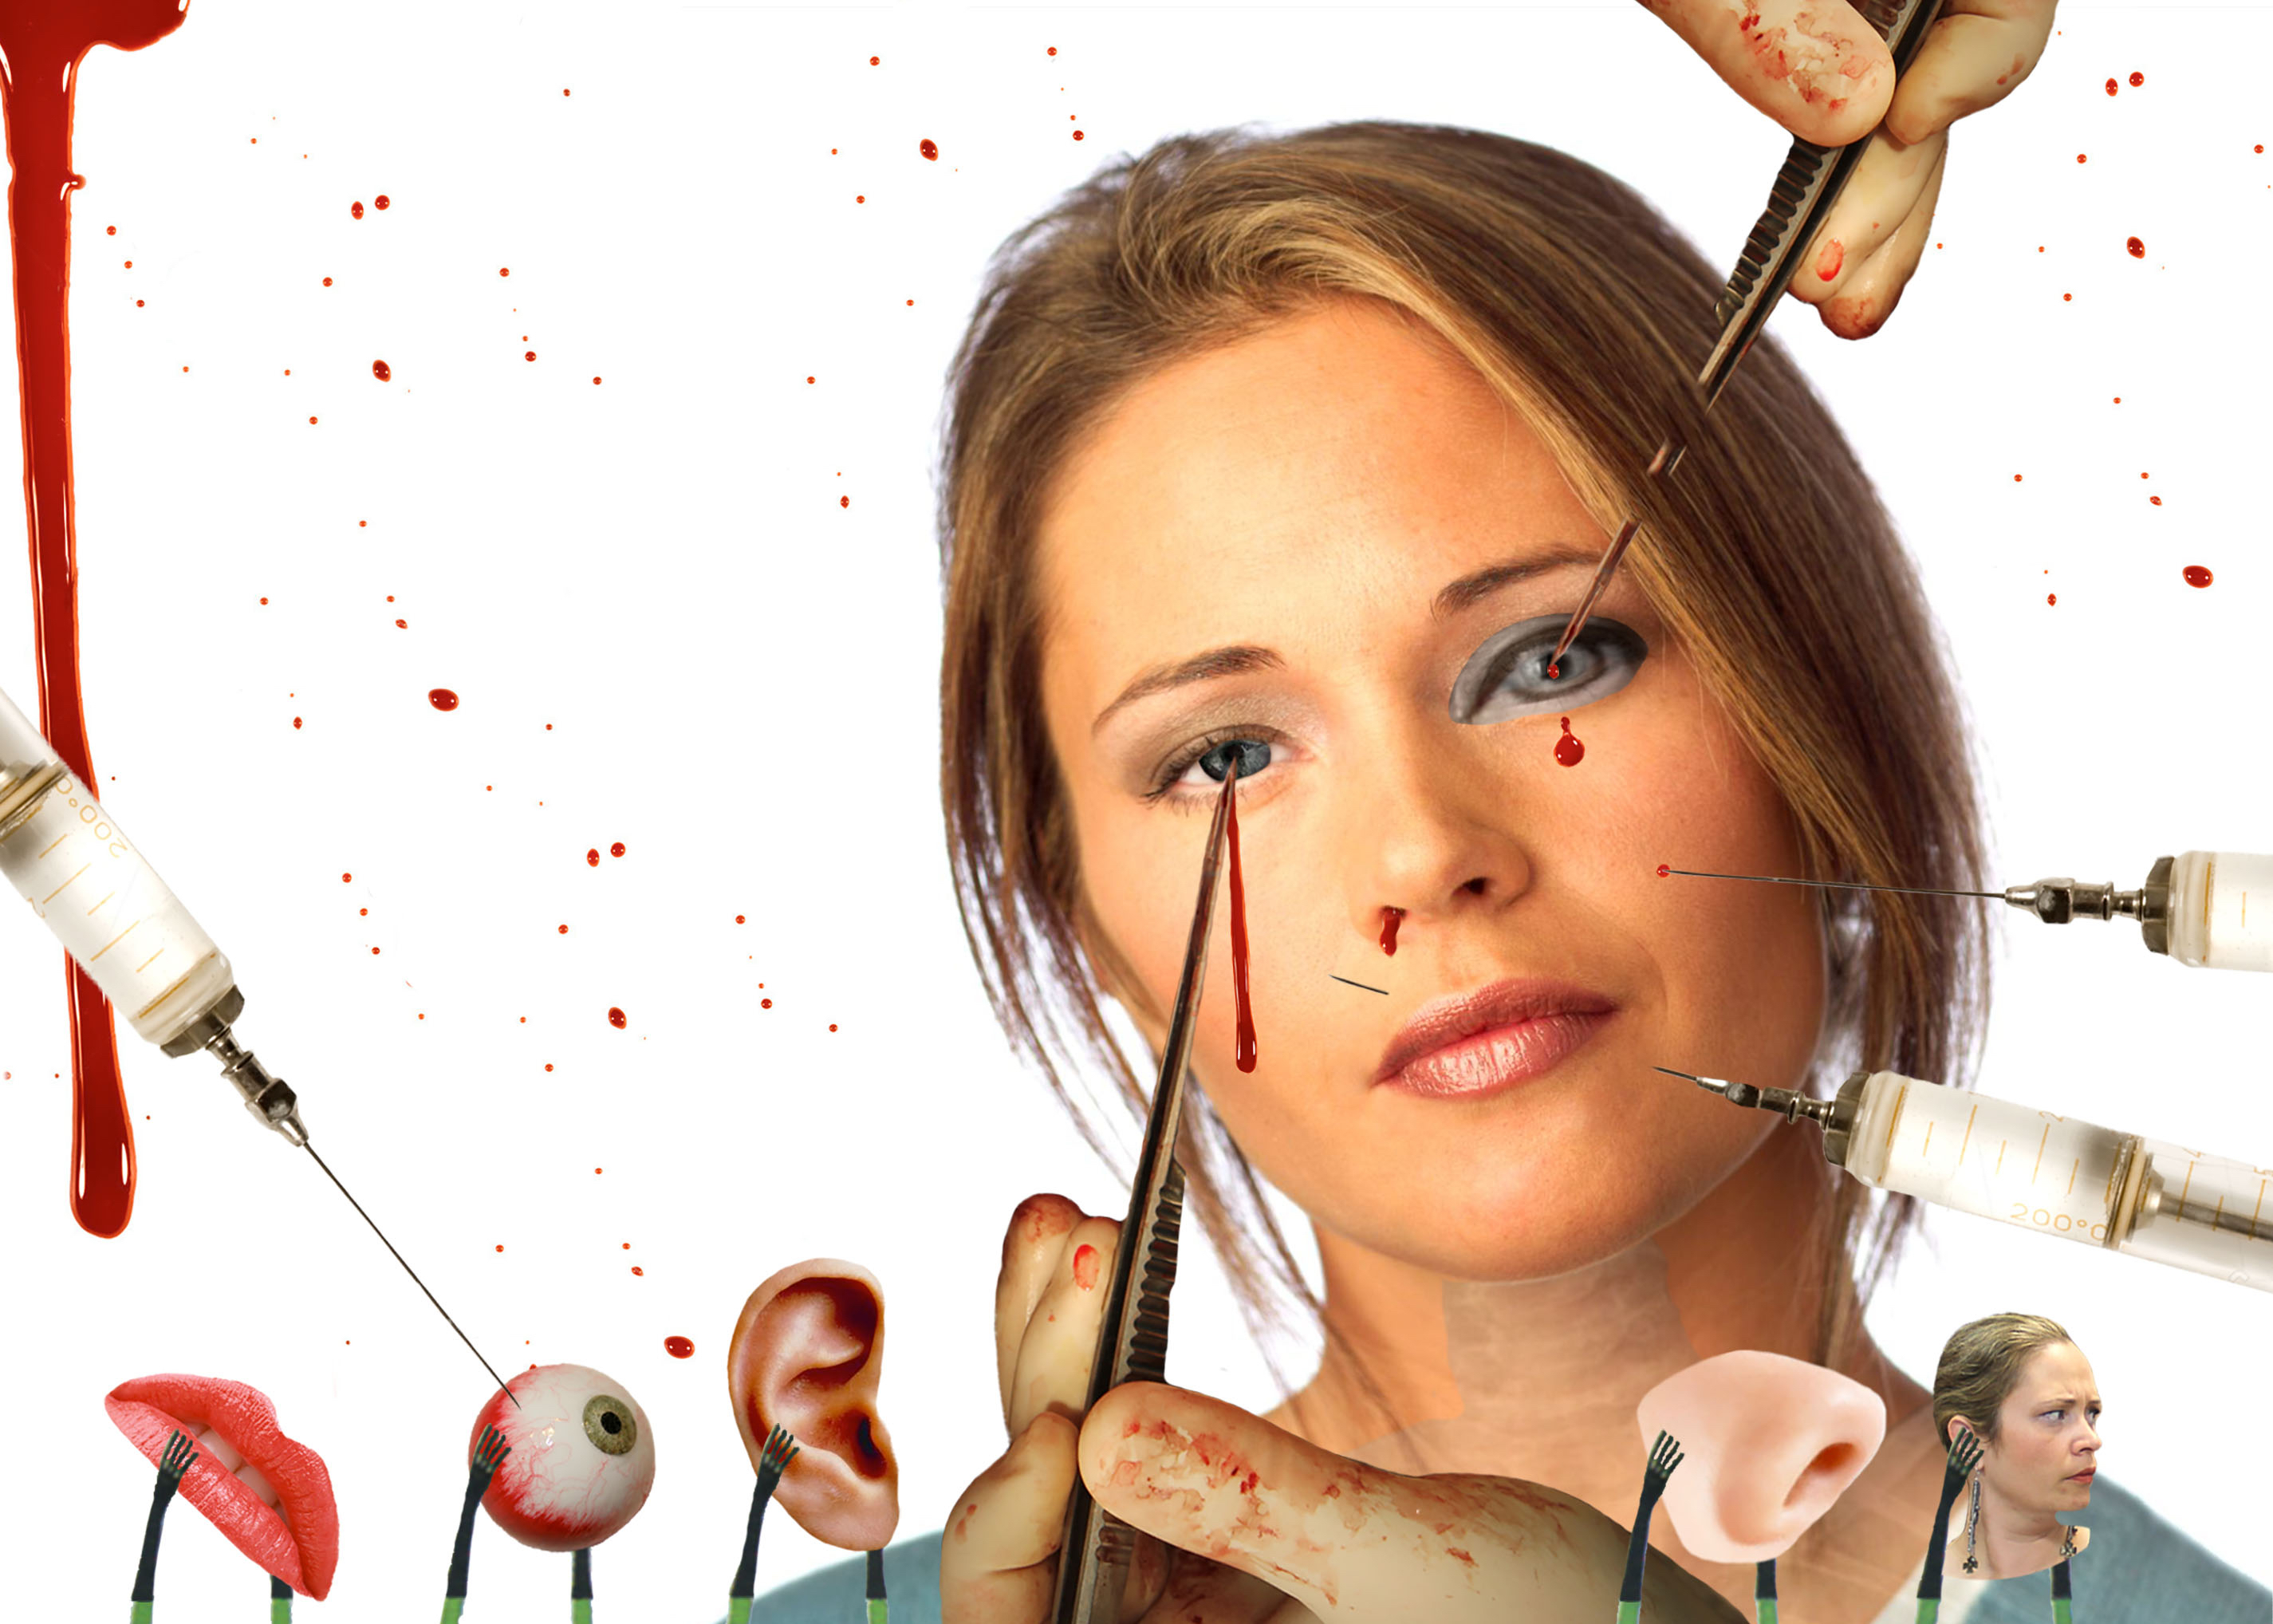 Digital images of needles and eyes, ears, lips, nose, blood, creating a fashion model's face.